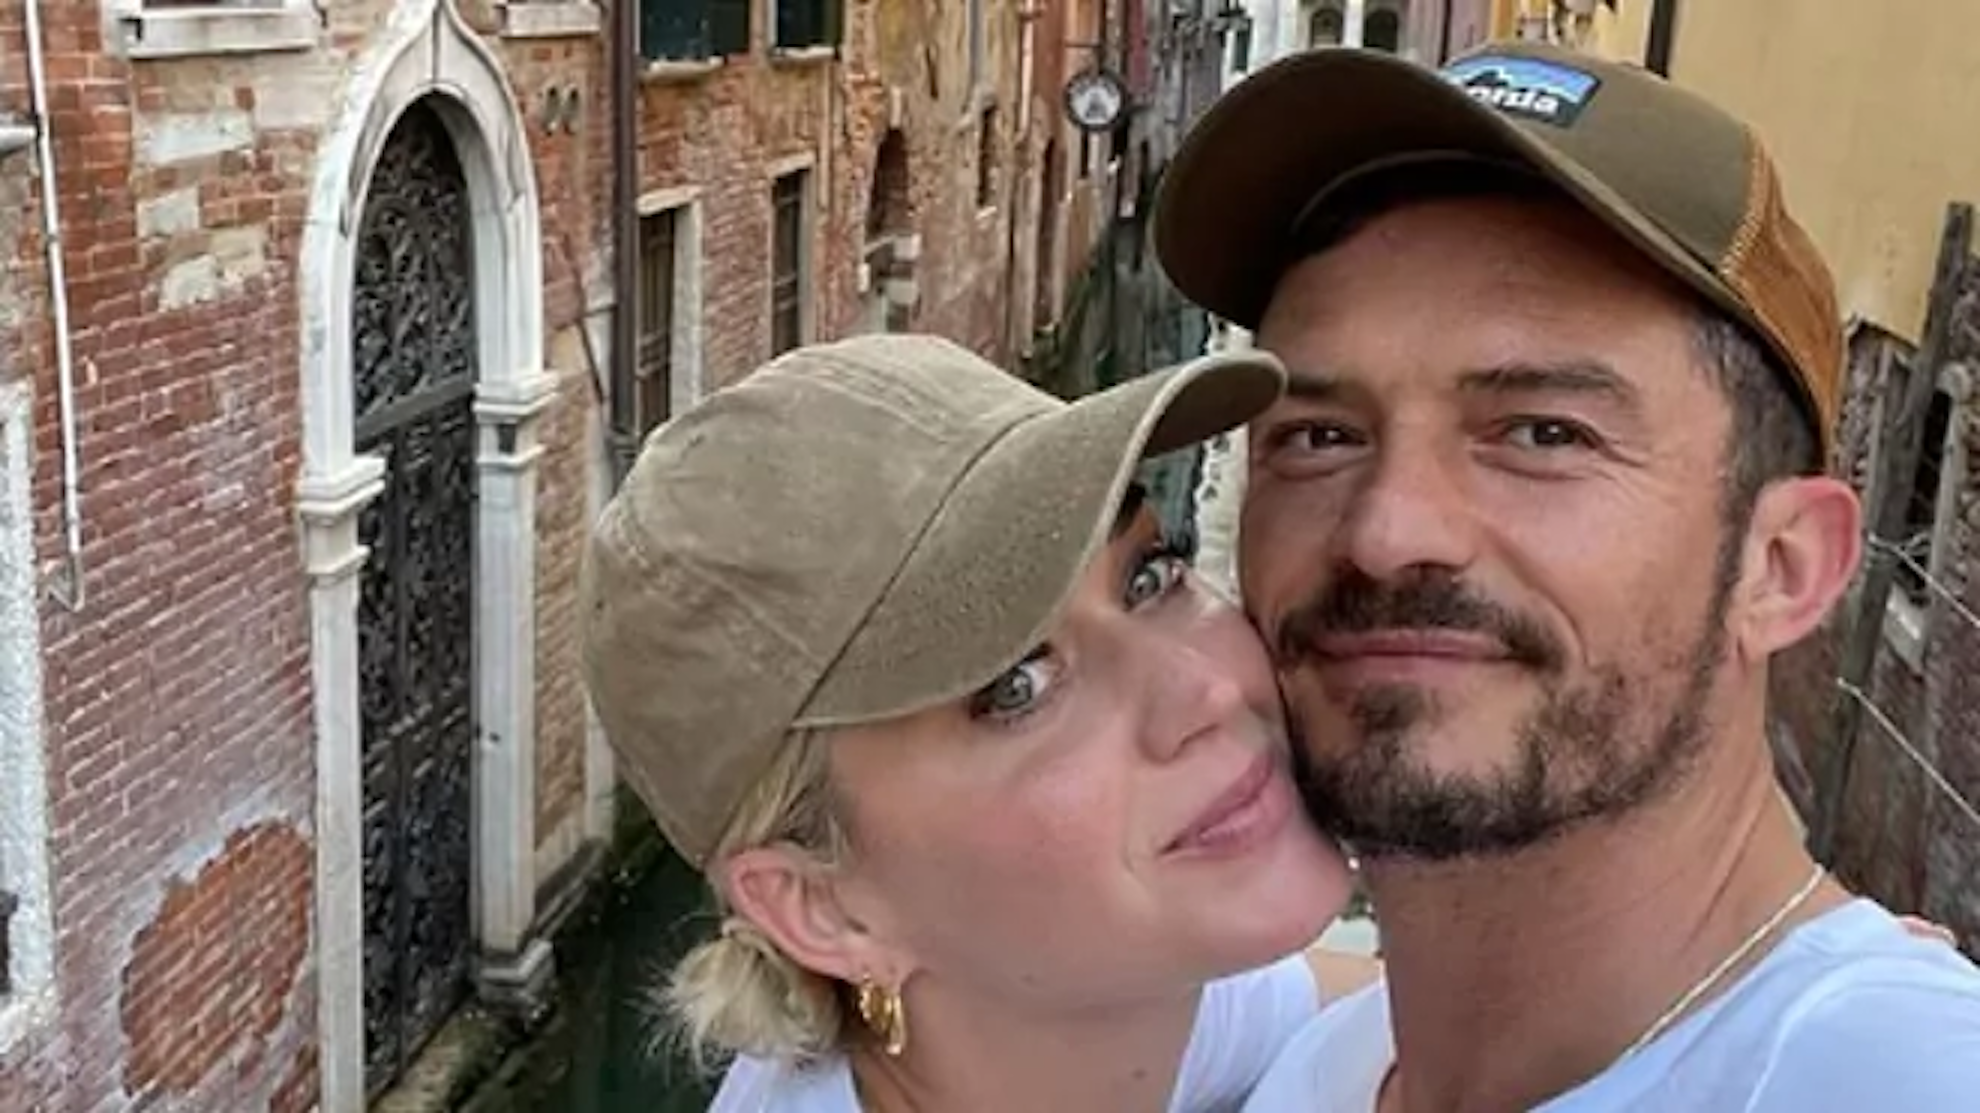 Katy Perry travels alone to see Taylor Swift: Has she broken Orlando Bloom engagement?